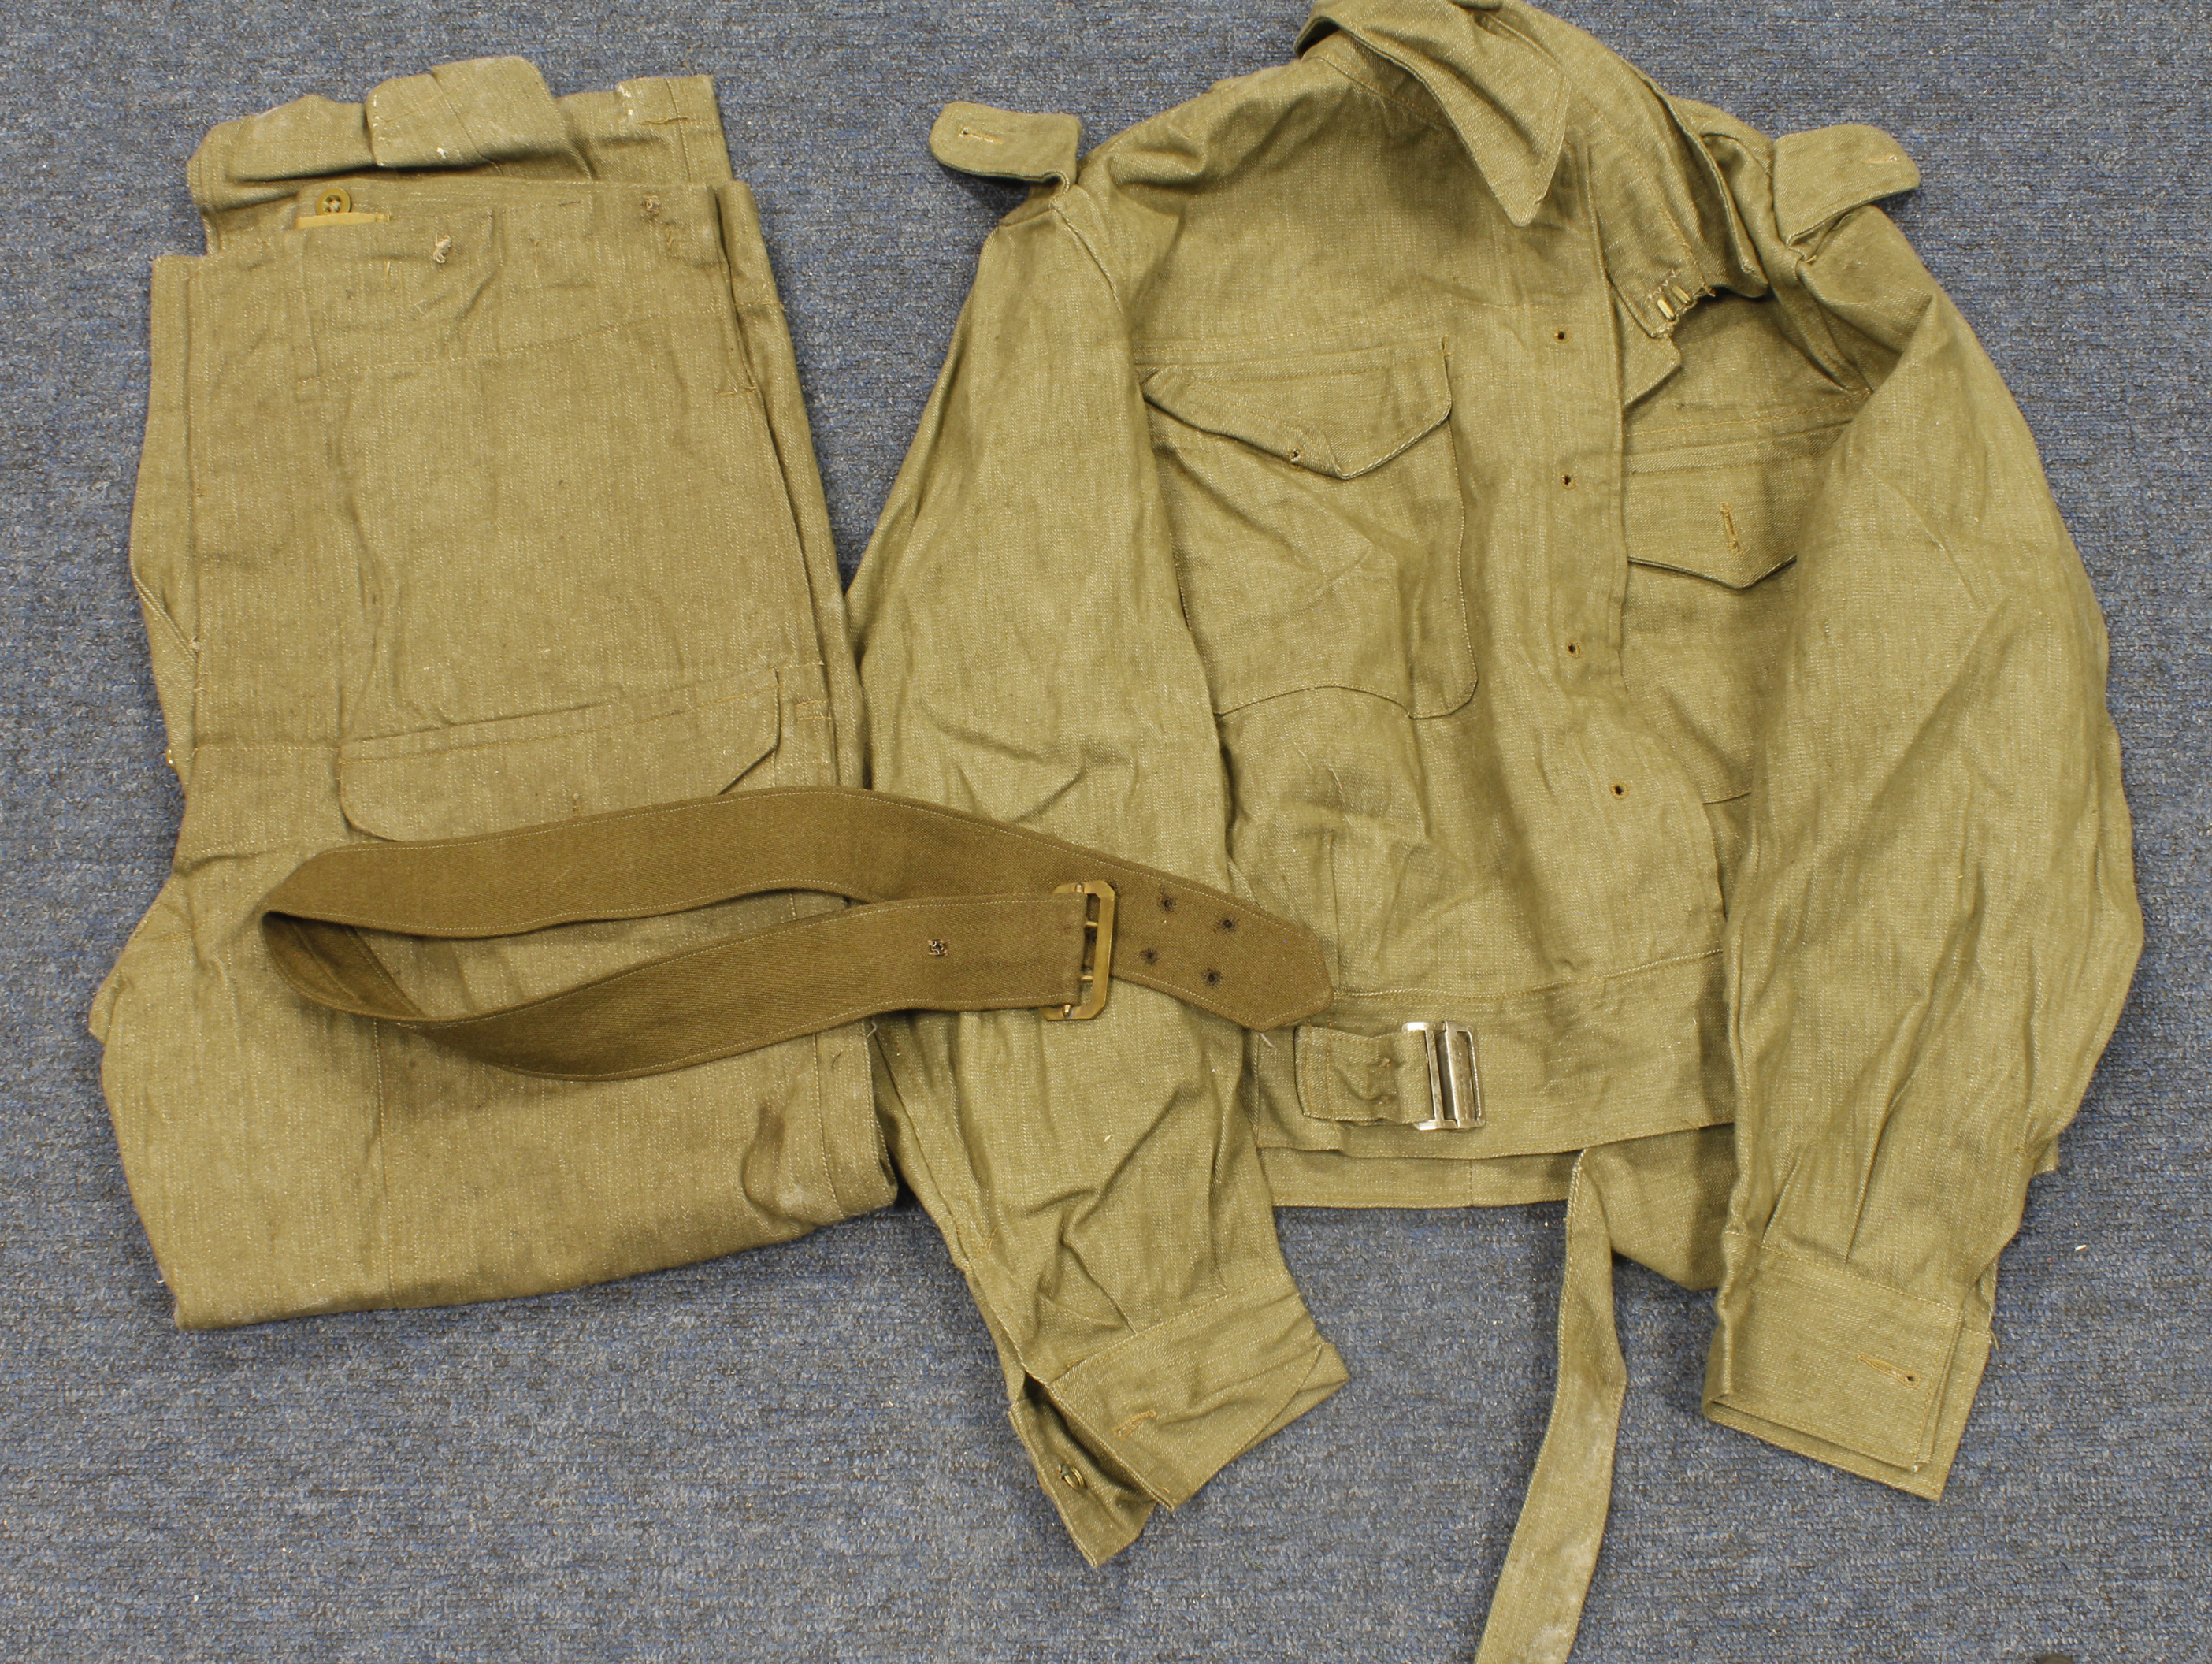 WW2 scarce denim Battle dress blouse and trousers and both dated 1945. Trousers waist 34” to 35”,